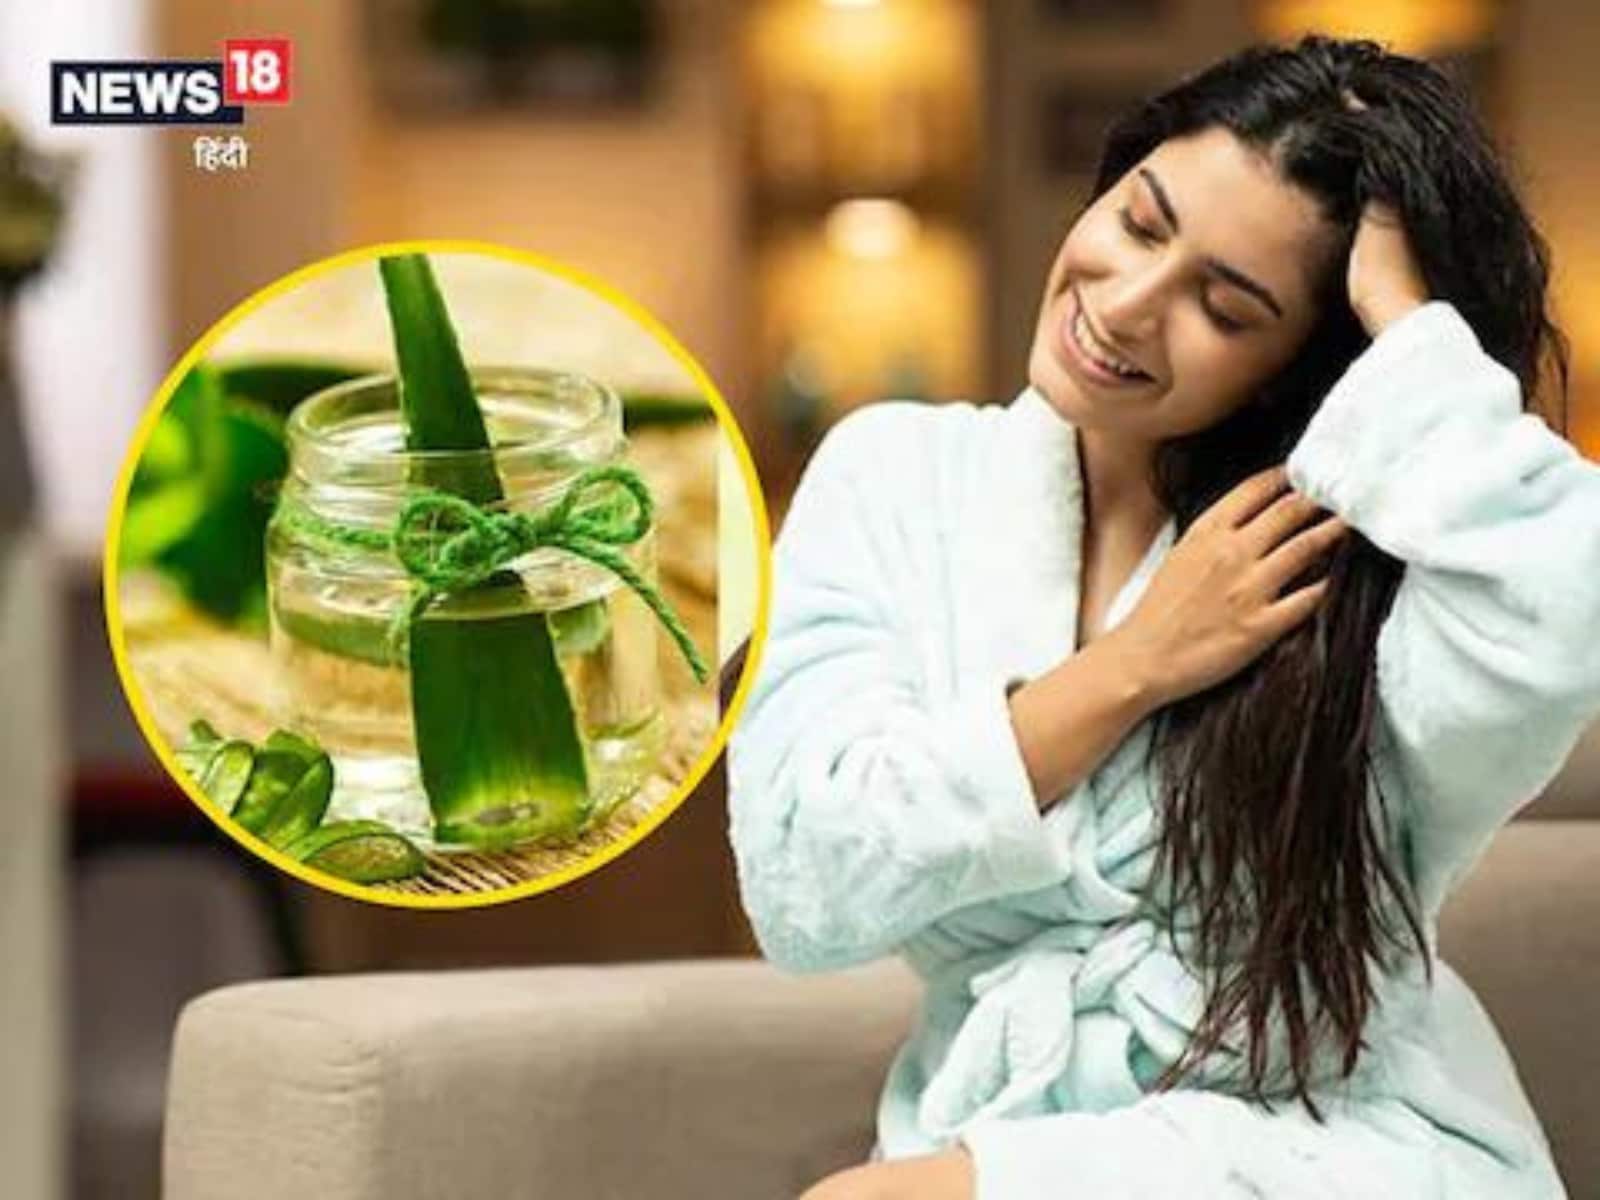 Try This Homemade Aloe-vera Oil to Keep Your Hair Healthy in This Heat